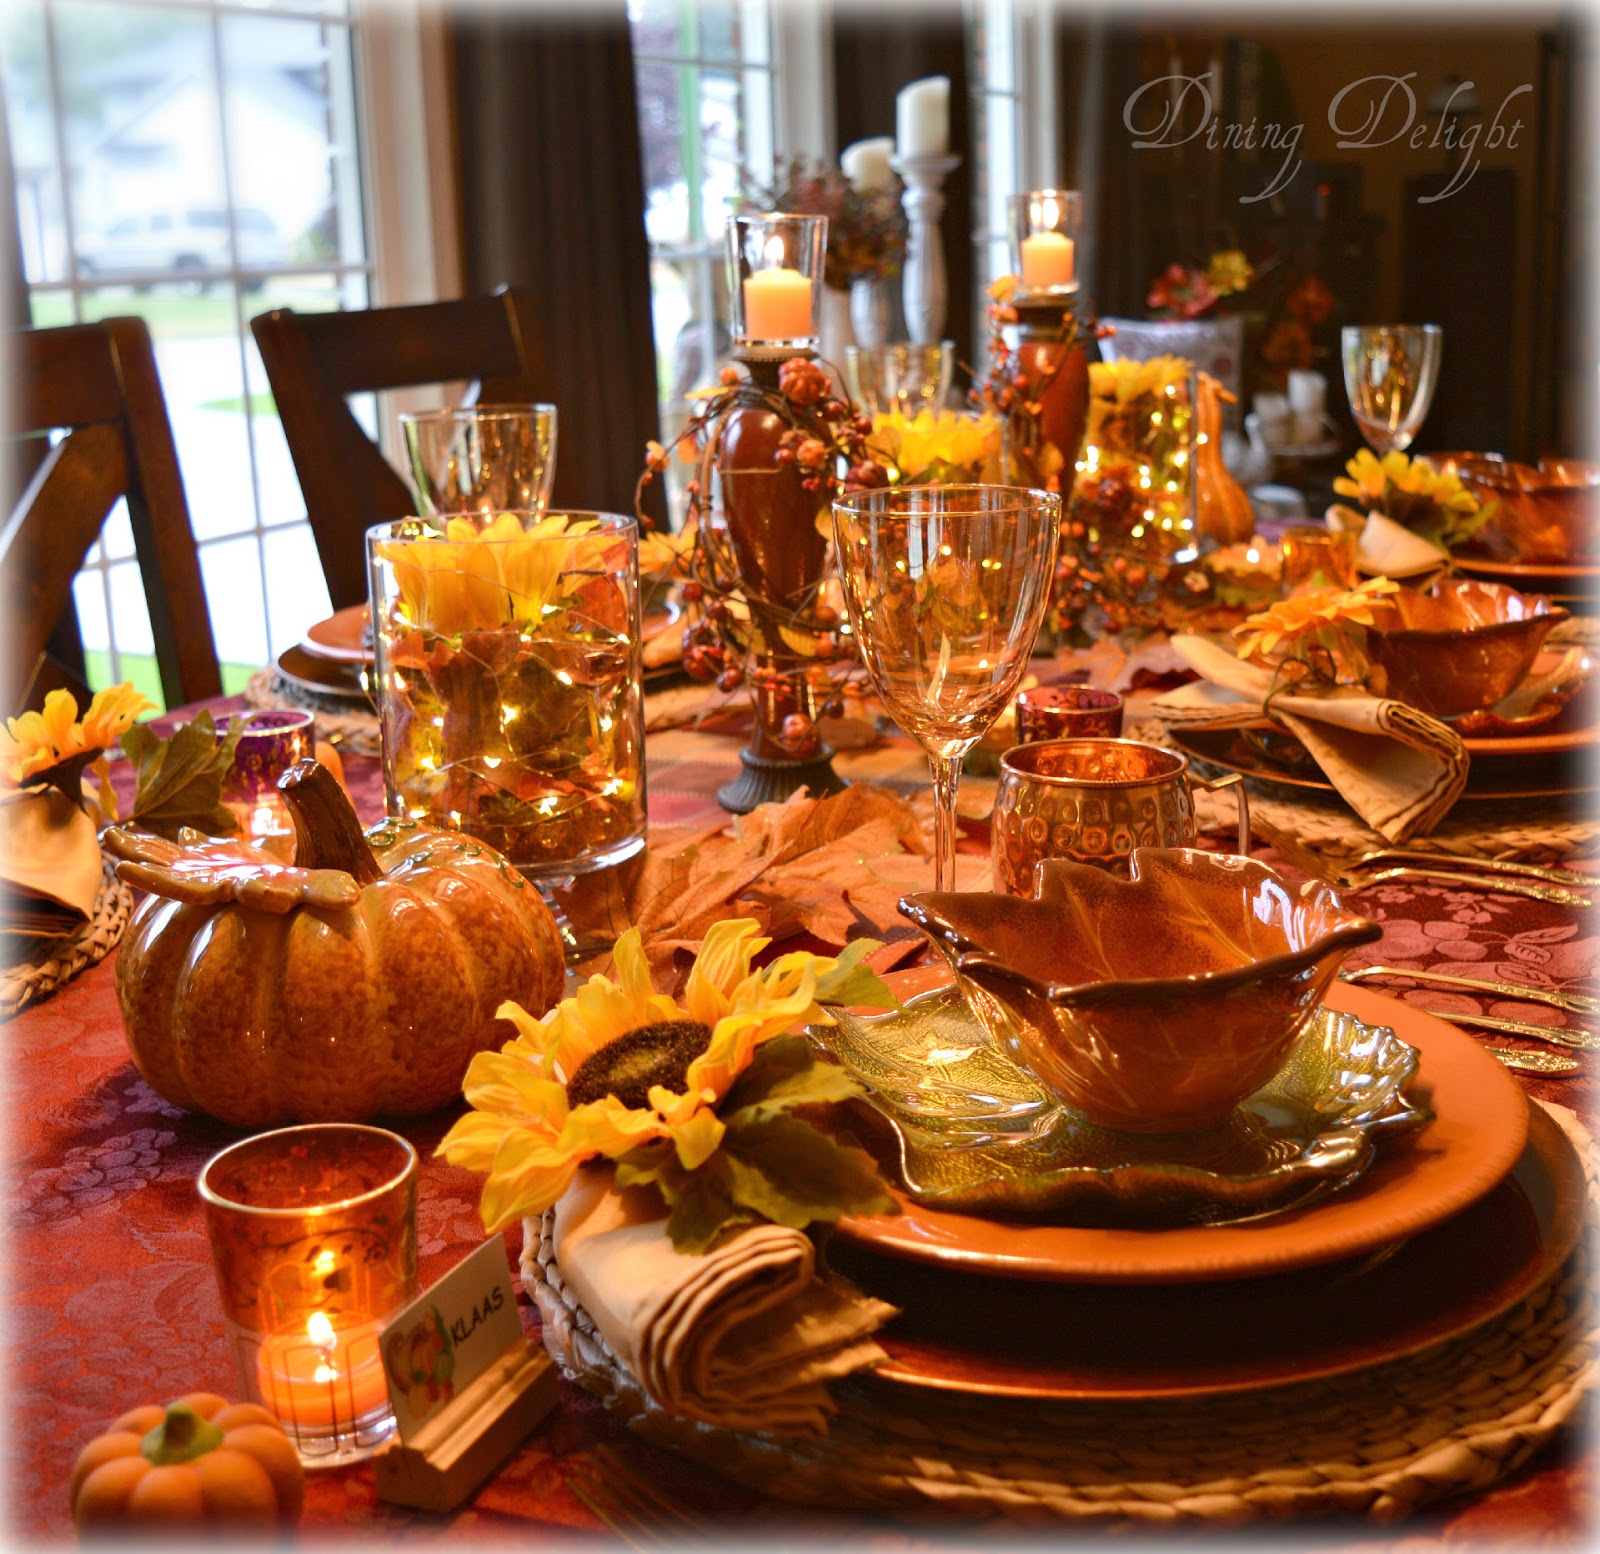 Dining Delight: Thanksgiving 2017 Tablescape